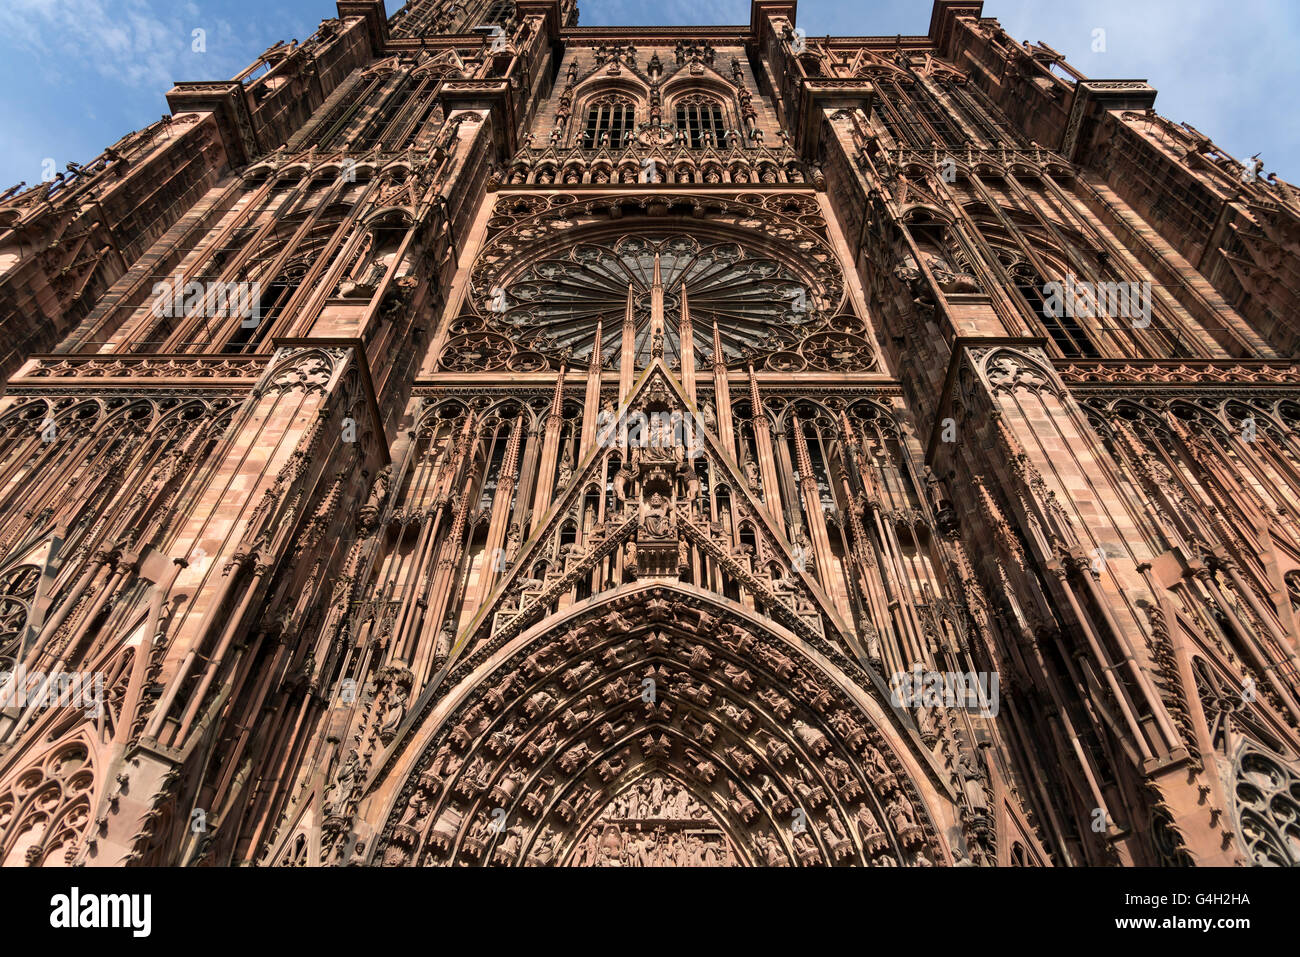 facade detail of the Strasbourg Cathedral, Strasbourg,  Alsace, France Stock Photo